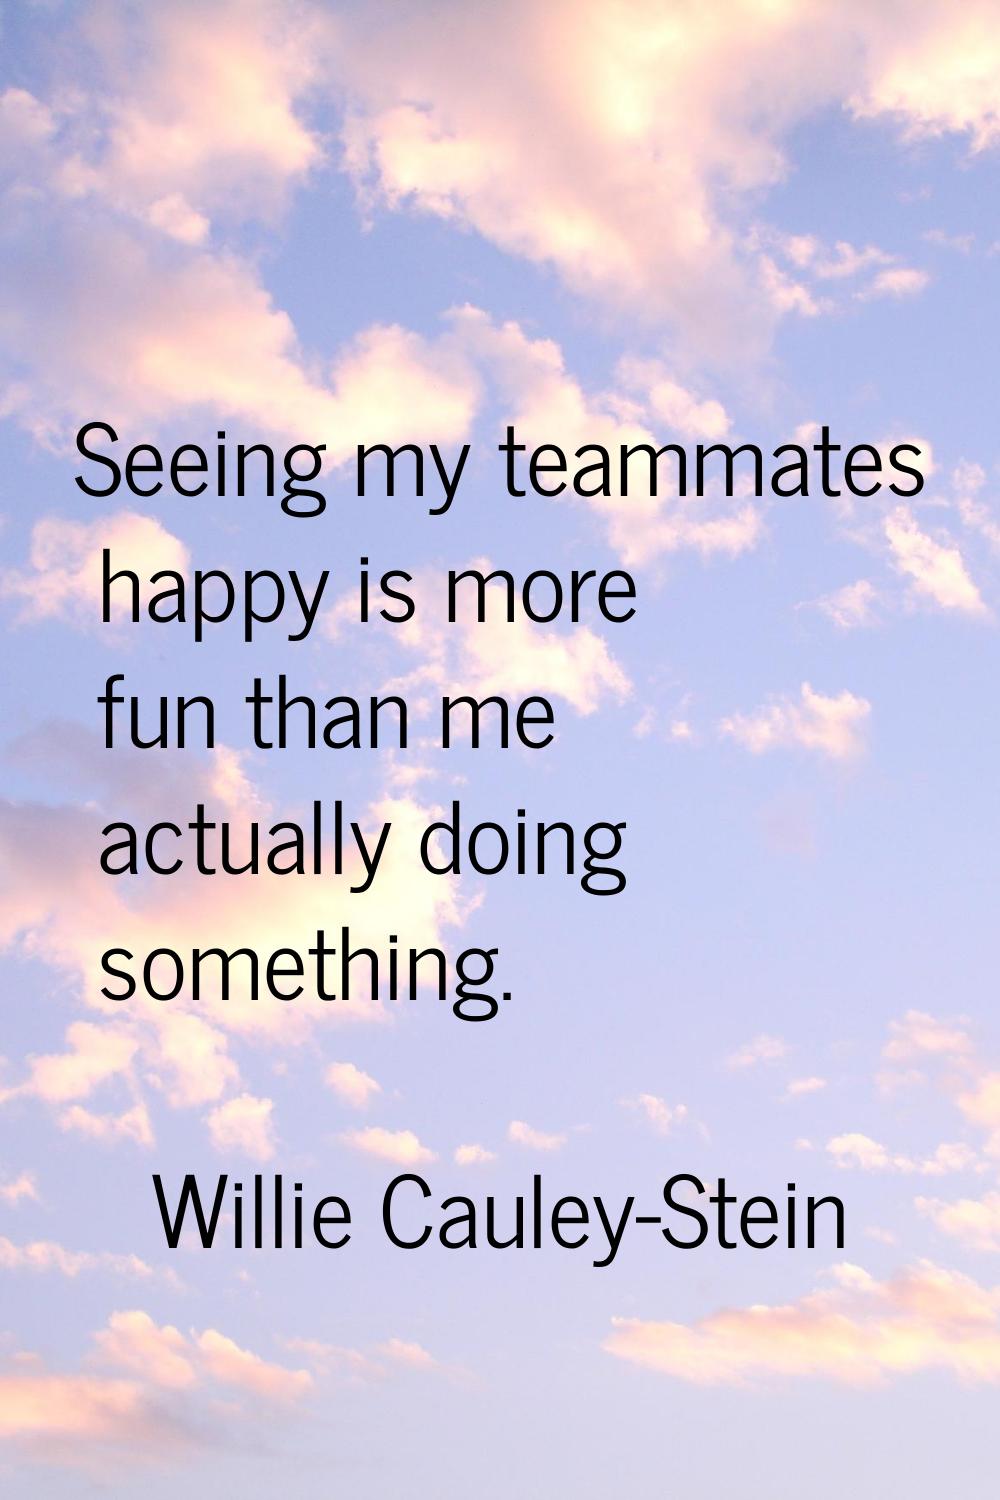 Seeing my teammates happy is more fun than me actually doing something.